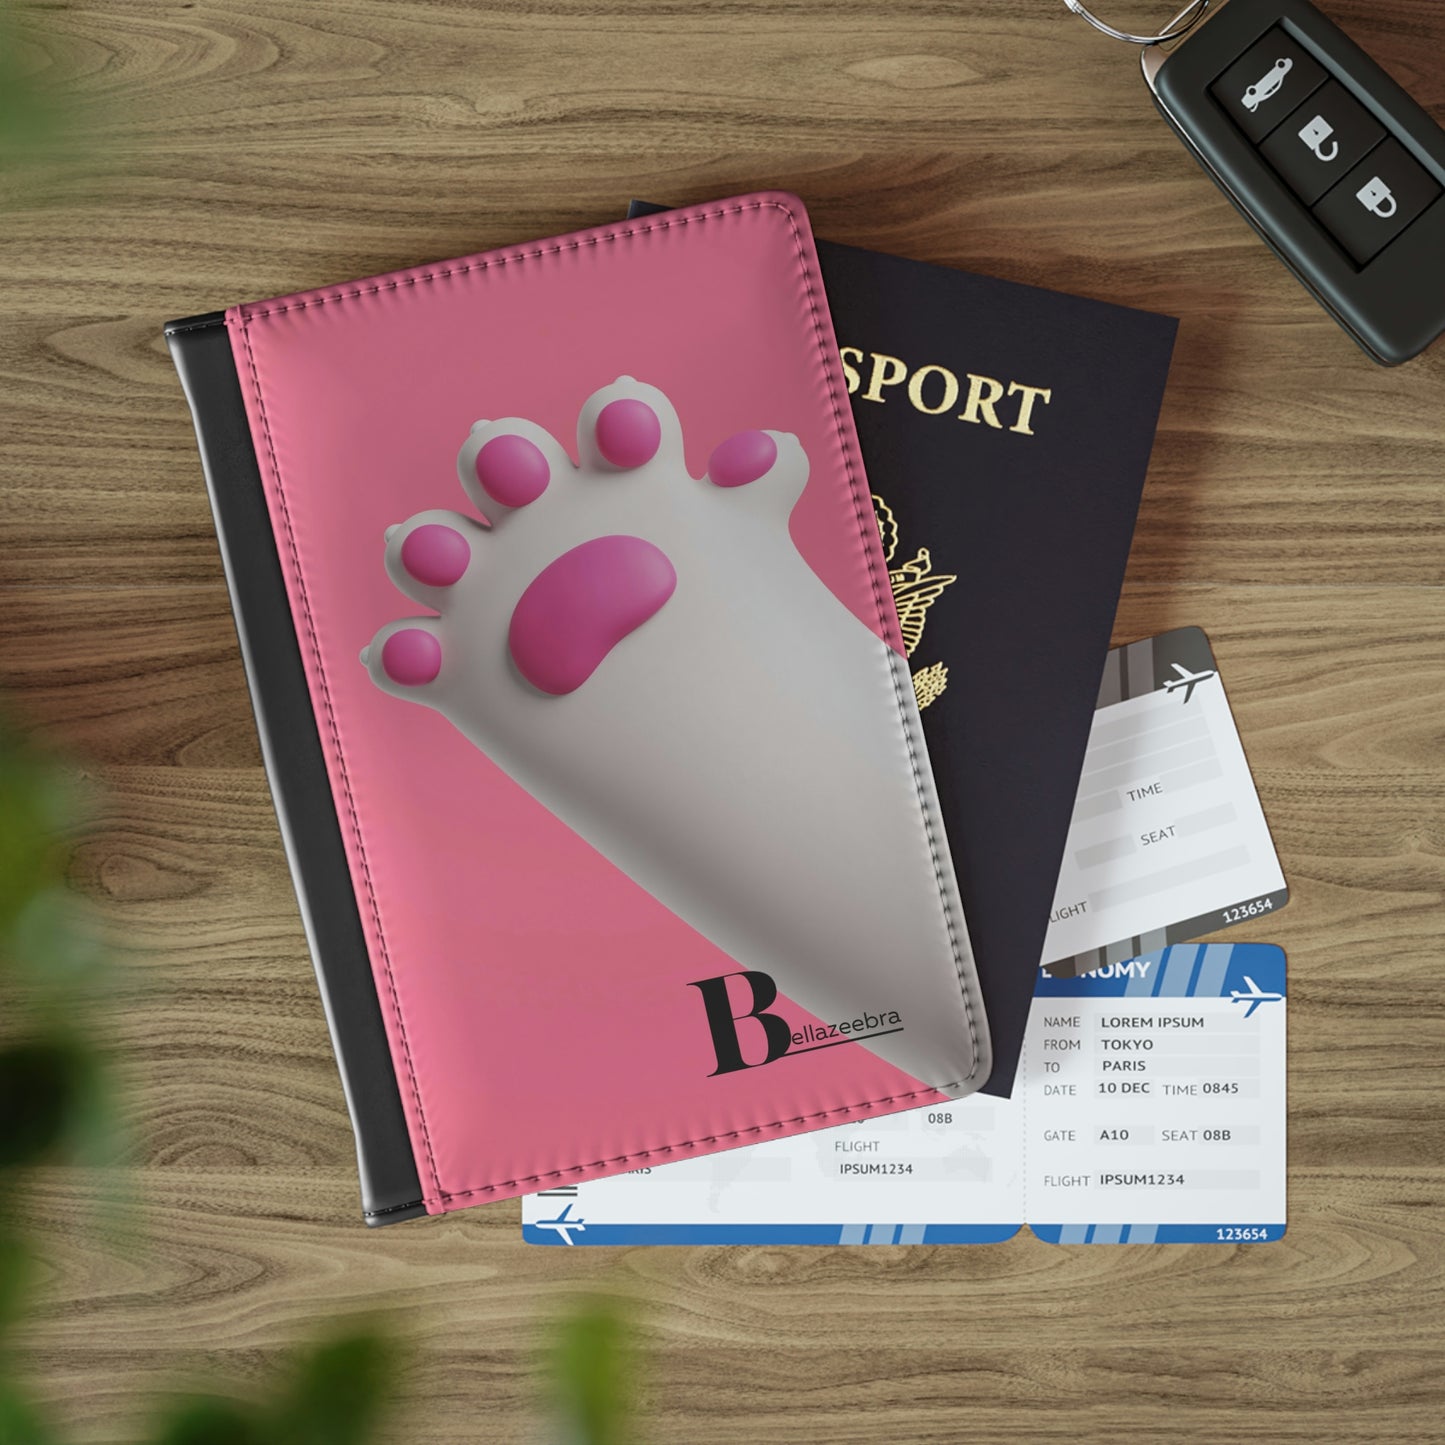 BELLAZEEBRA Passport Cover with pet paw and pink background